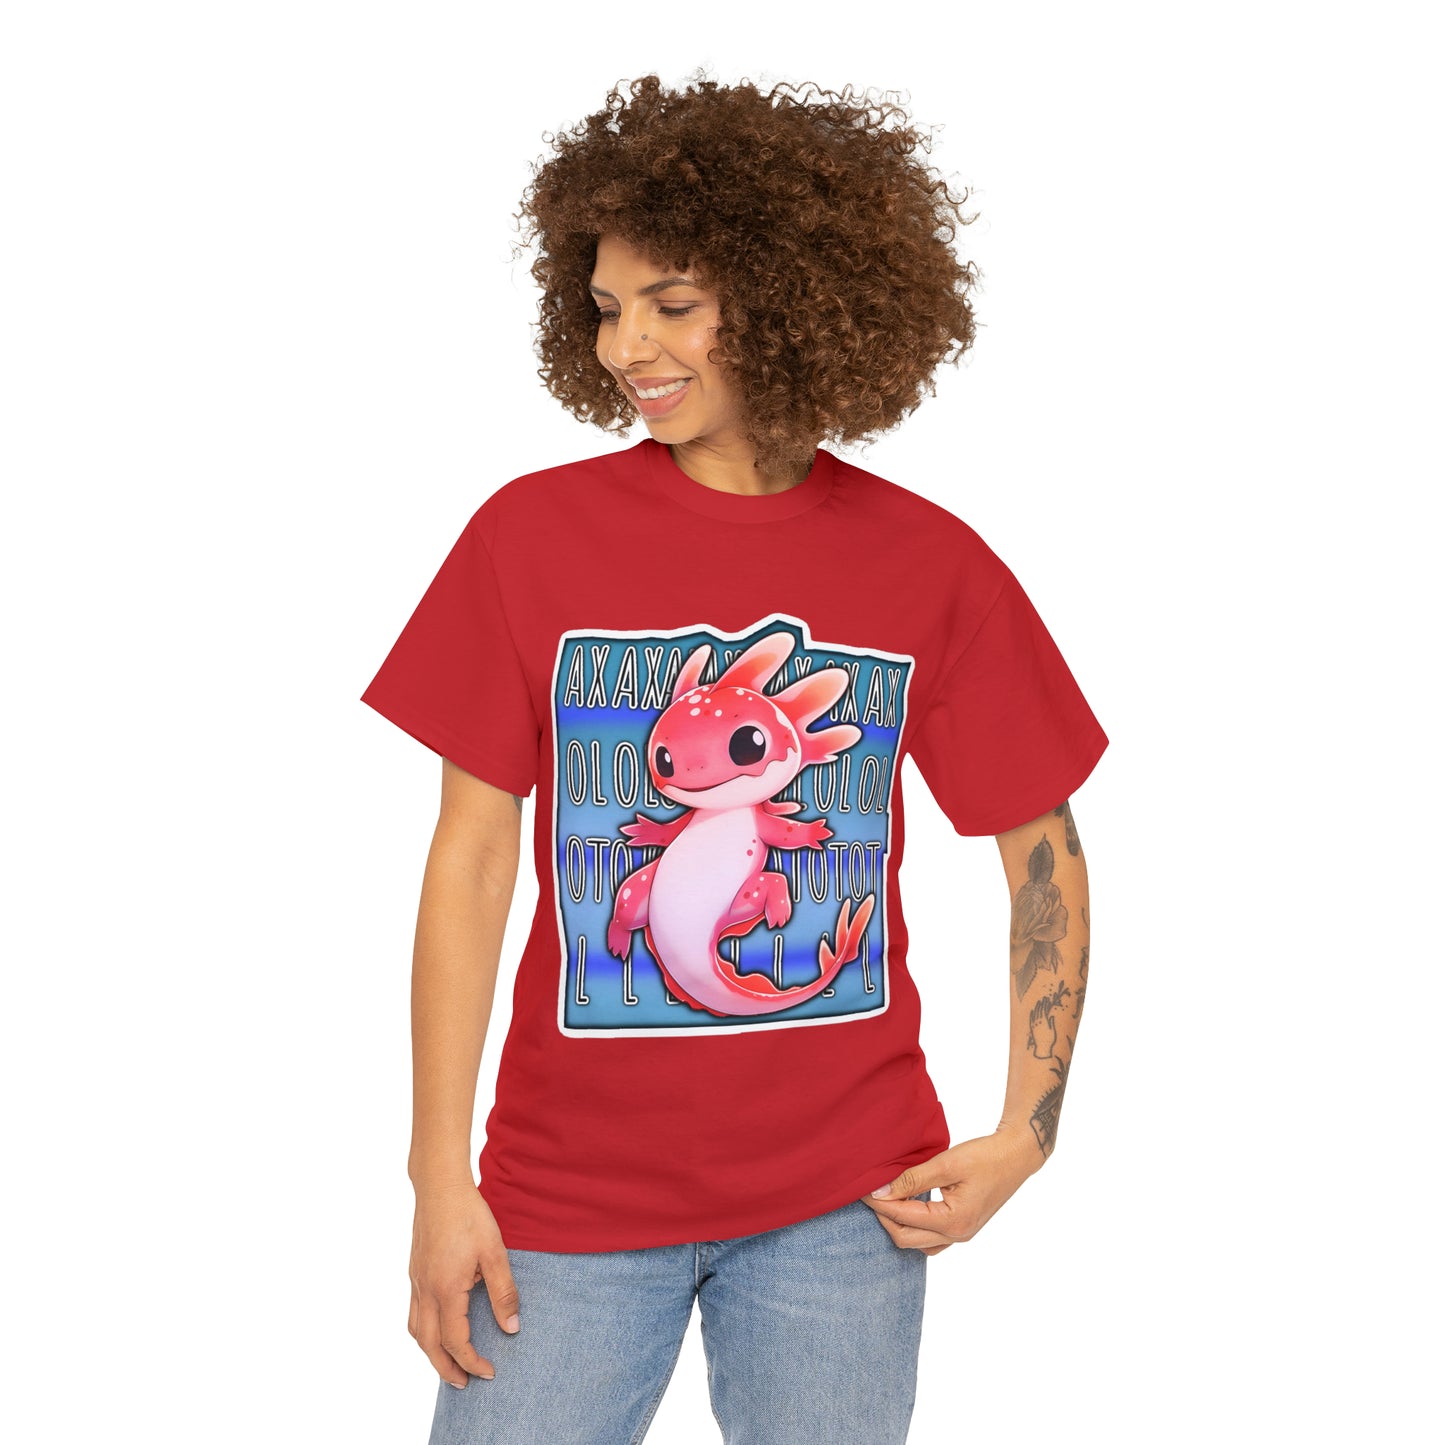 Pink Axolotl on Blue Background Cute Animal Tee Shirt, Black, Royal Blue, Red, and Navy T-Shirts, Model Mockups on a White background, Awesome Designs by Zeesdesign, Free Shipping on orders over $50